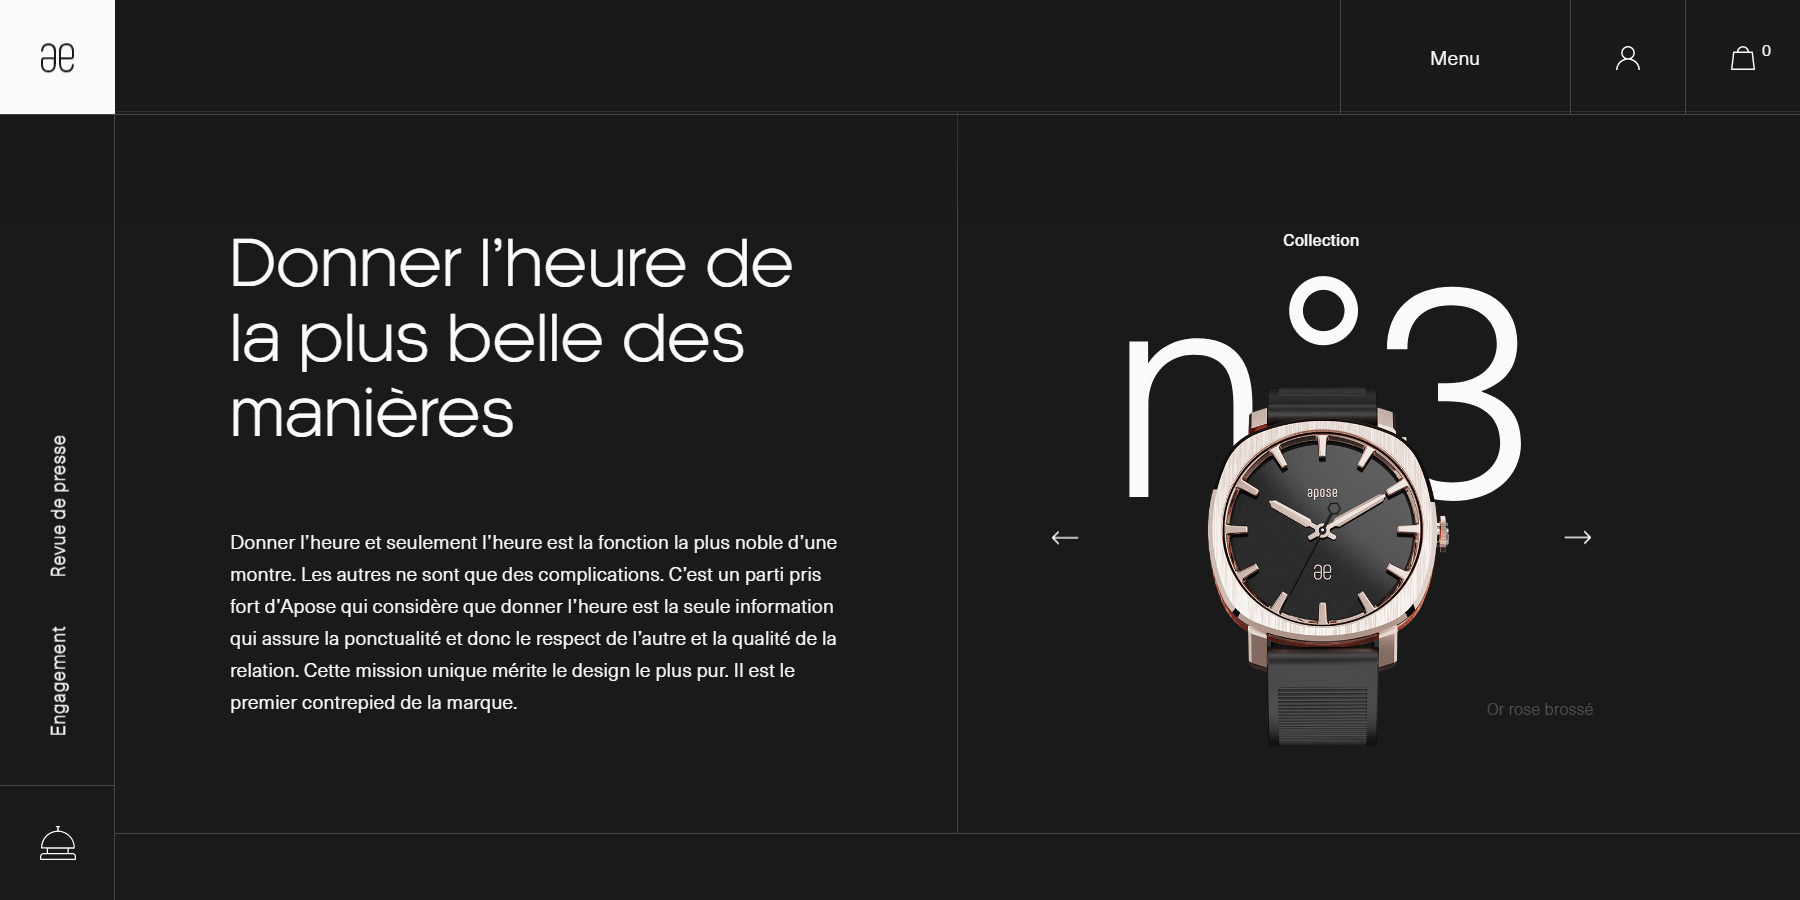 Apose - Website of the Day